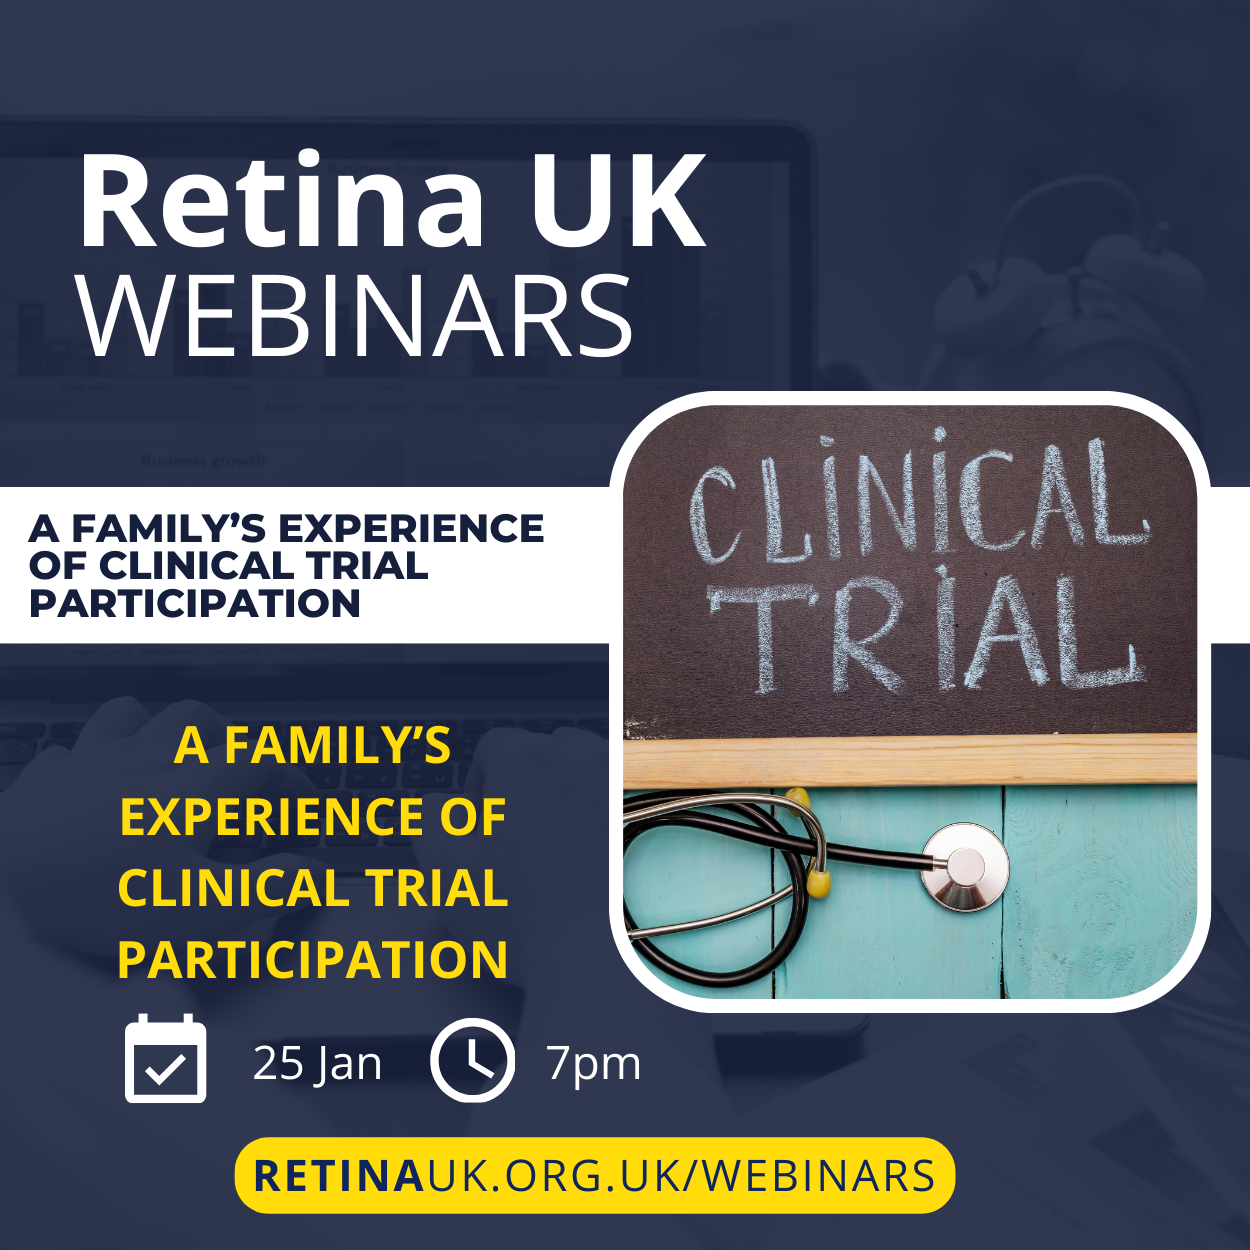 A square promotional image with details of our webinar on 25 Jan: A family's experience of clinical trial participation